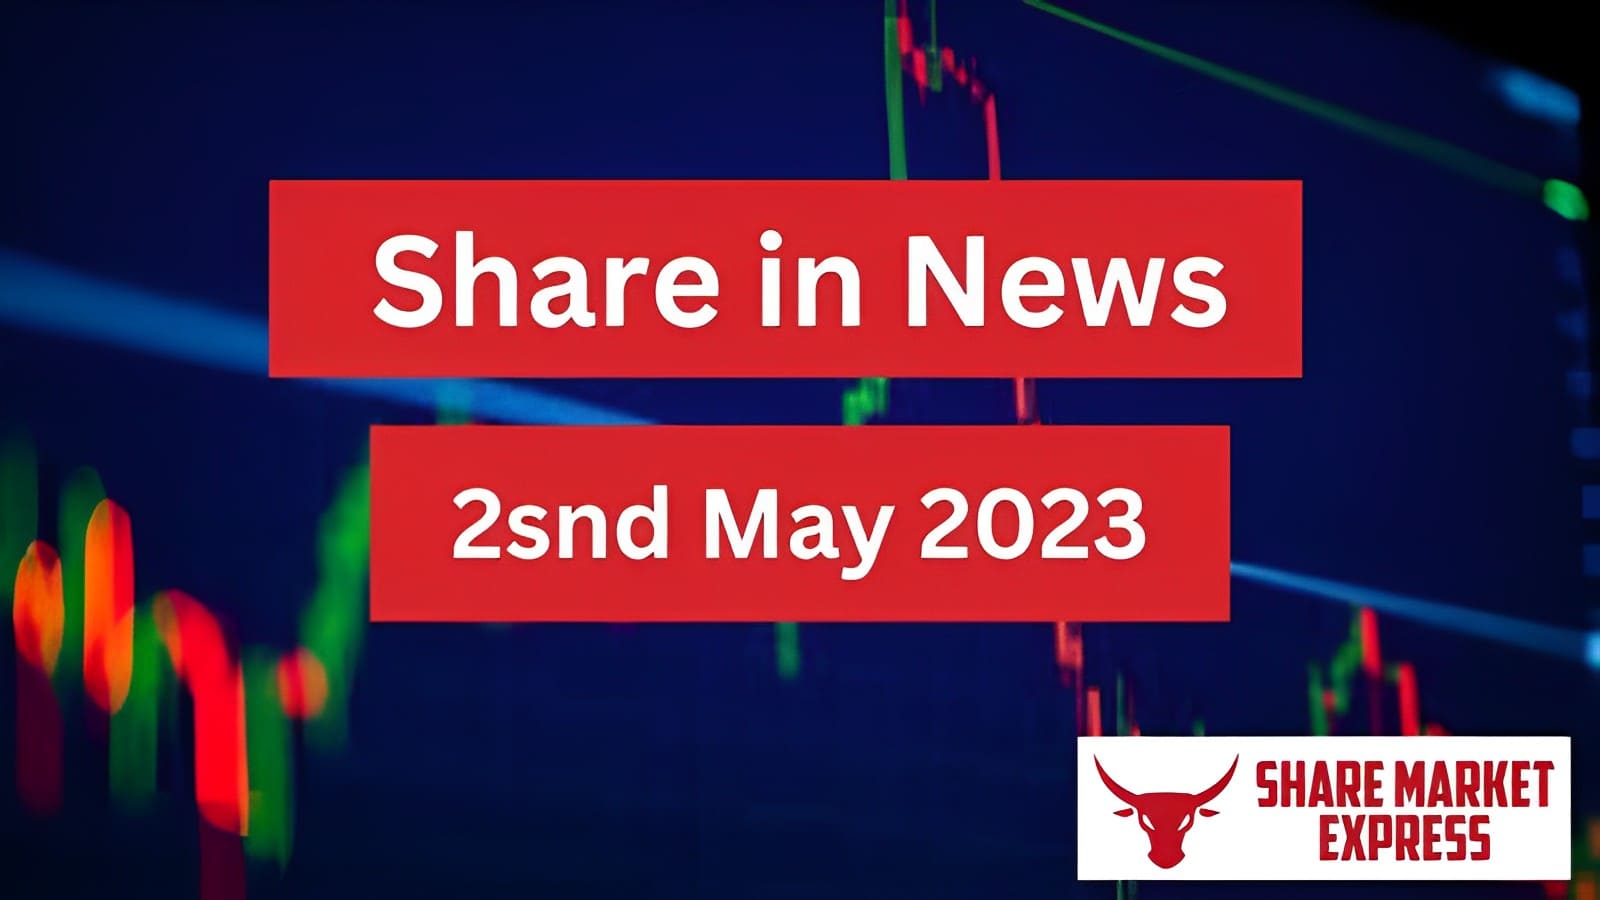 Share in News | Adani Green, Suzlon, UCO Bank, Tata Steel & Others in NEWS Today